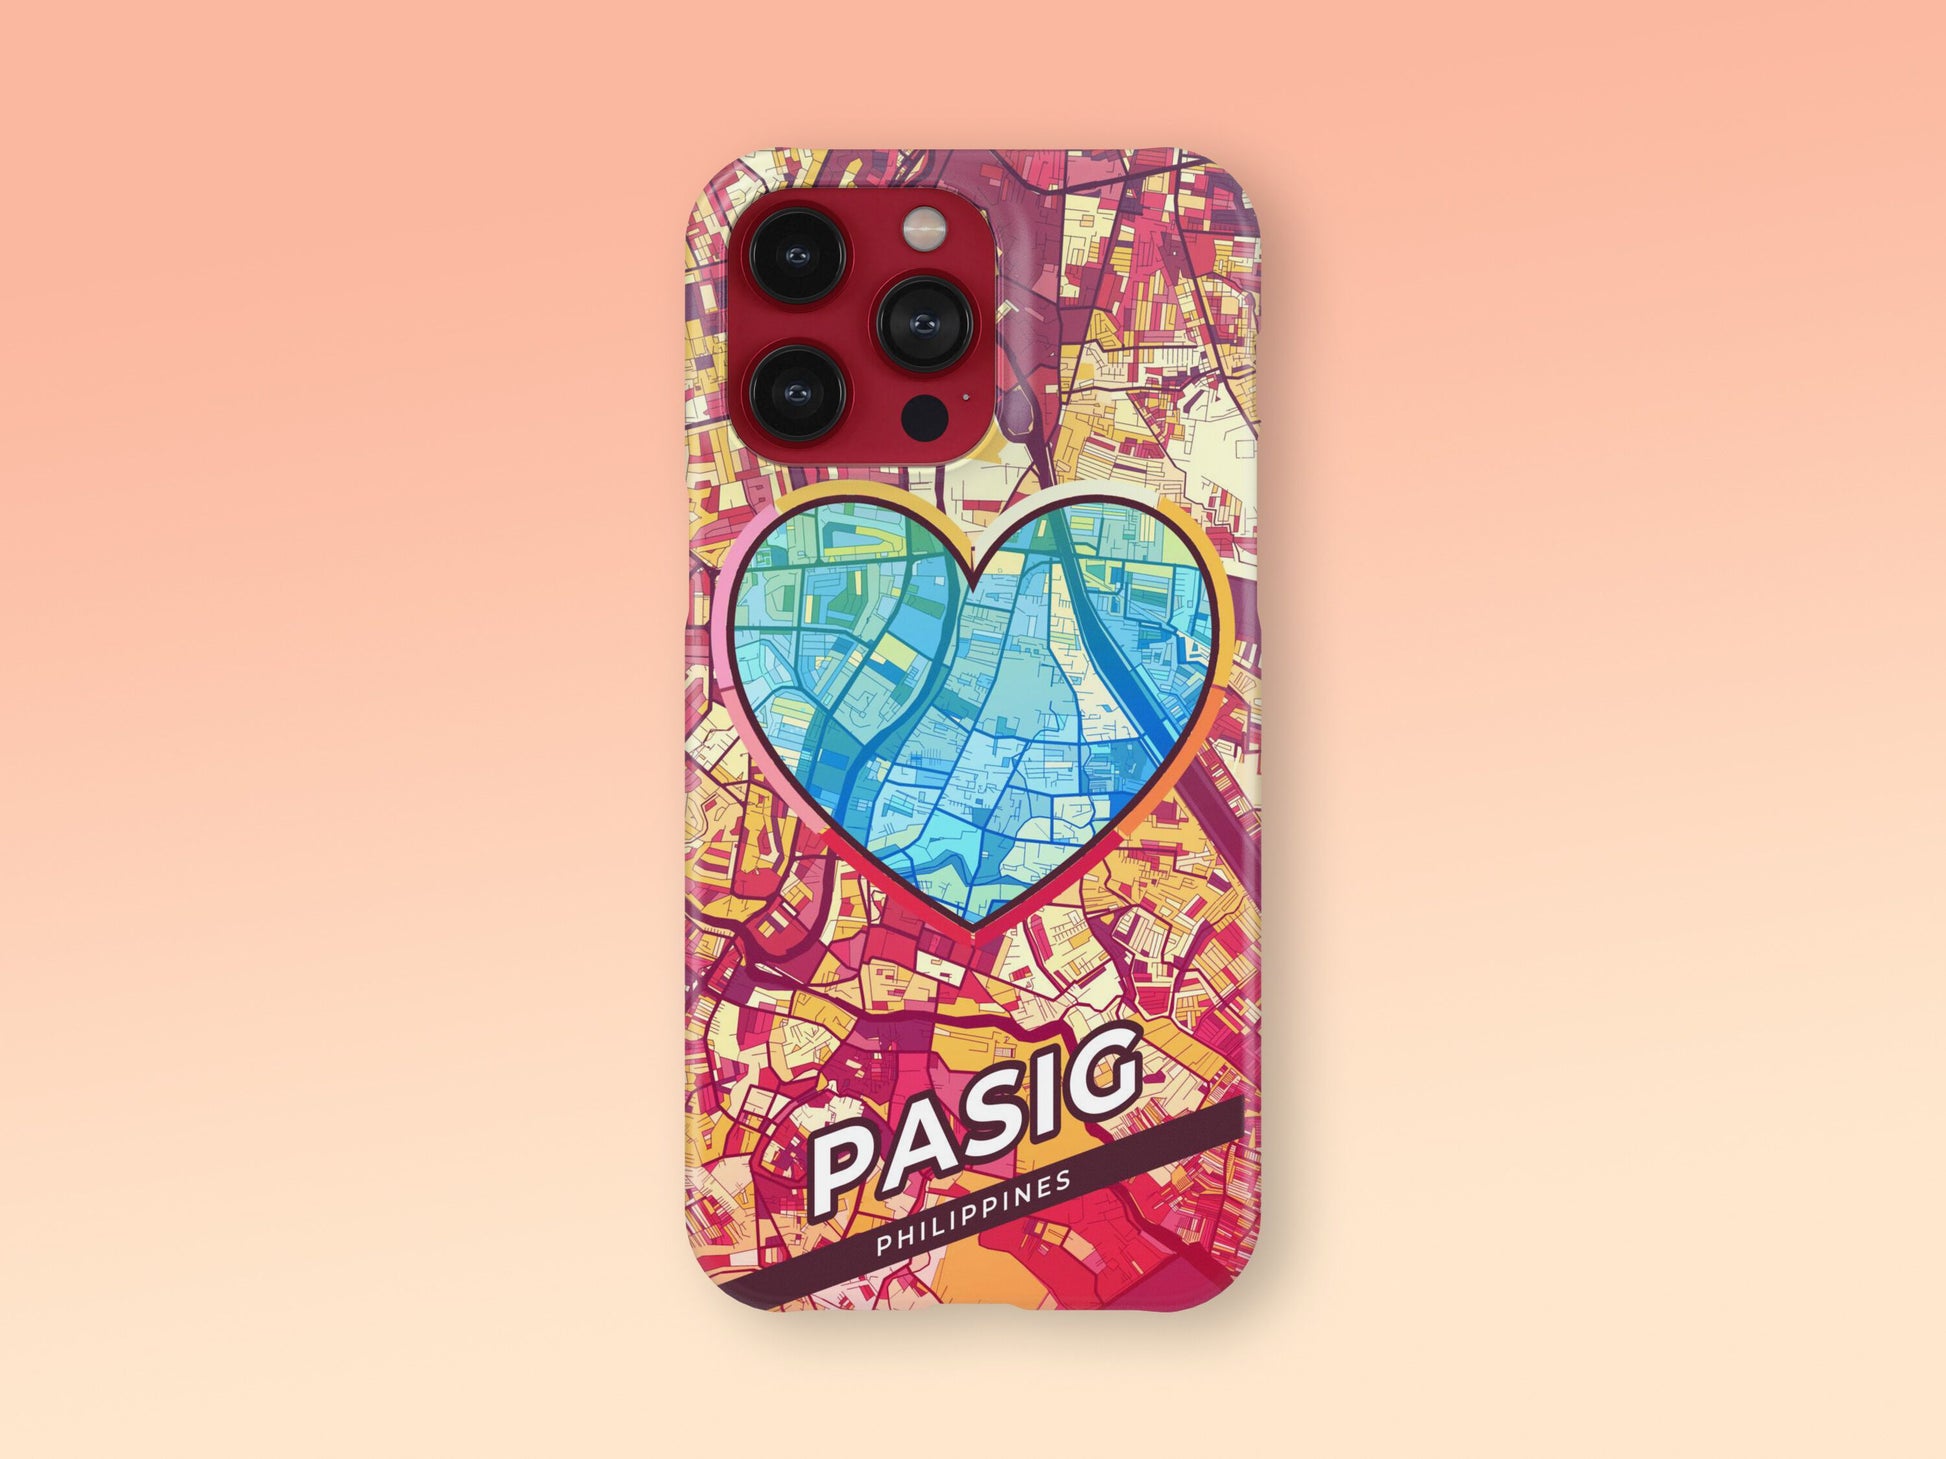 Pasig Philippines slim phone case with colorful icon 2